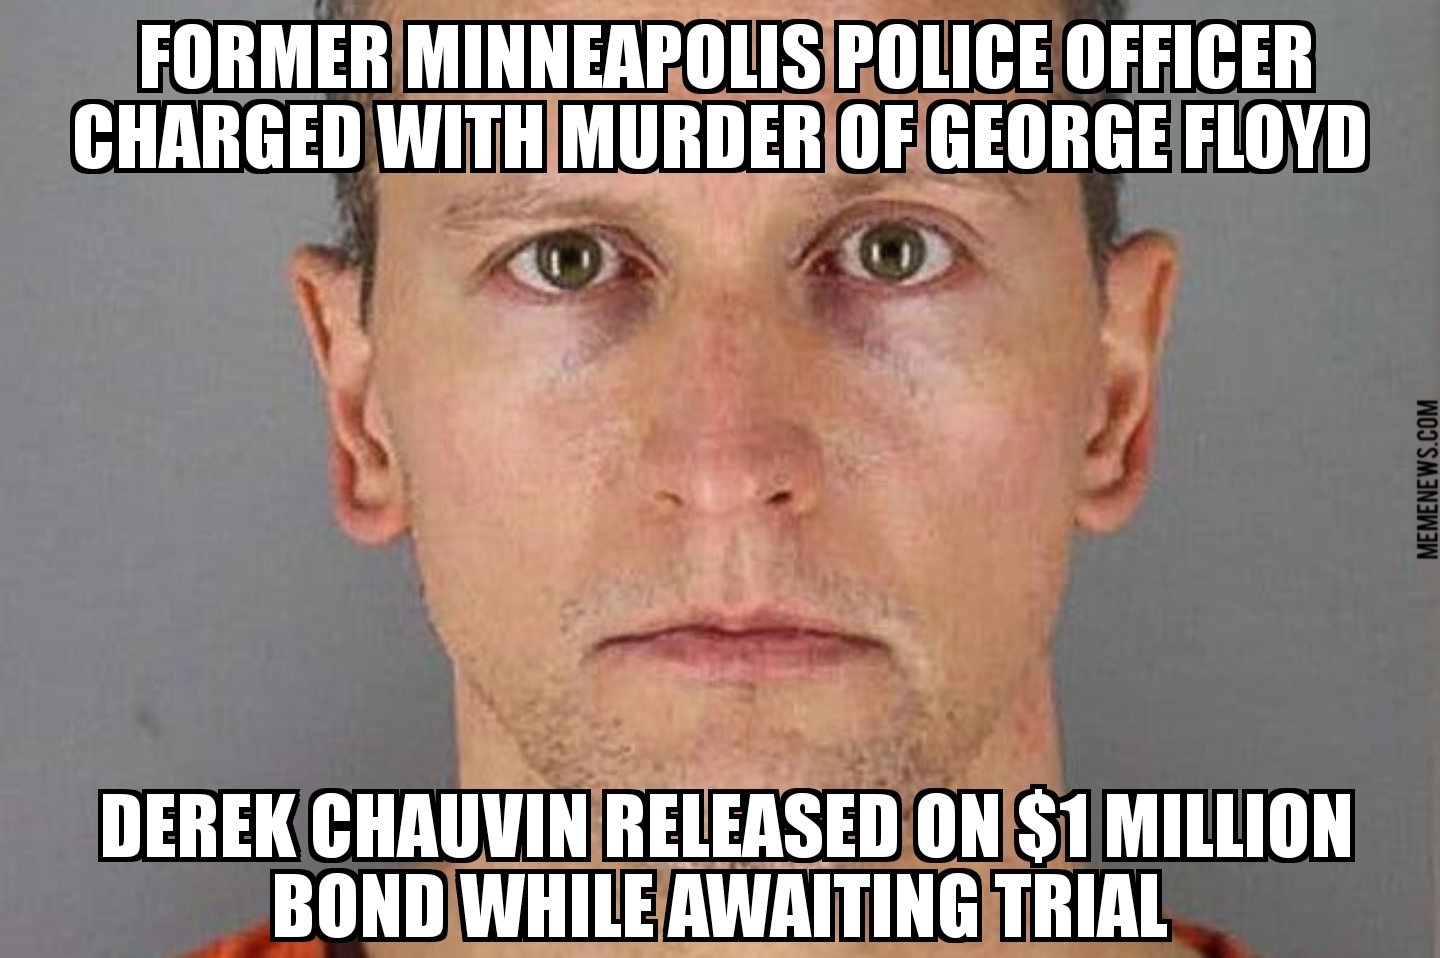 Officer charged with George Floyd murder, Derek Chauvin released on bond